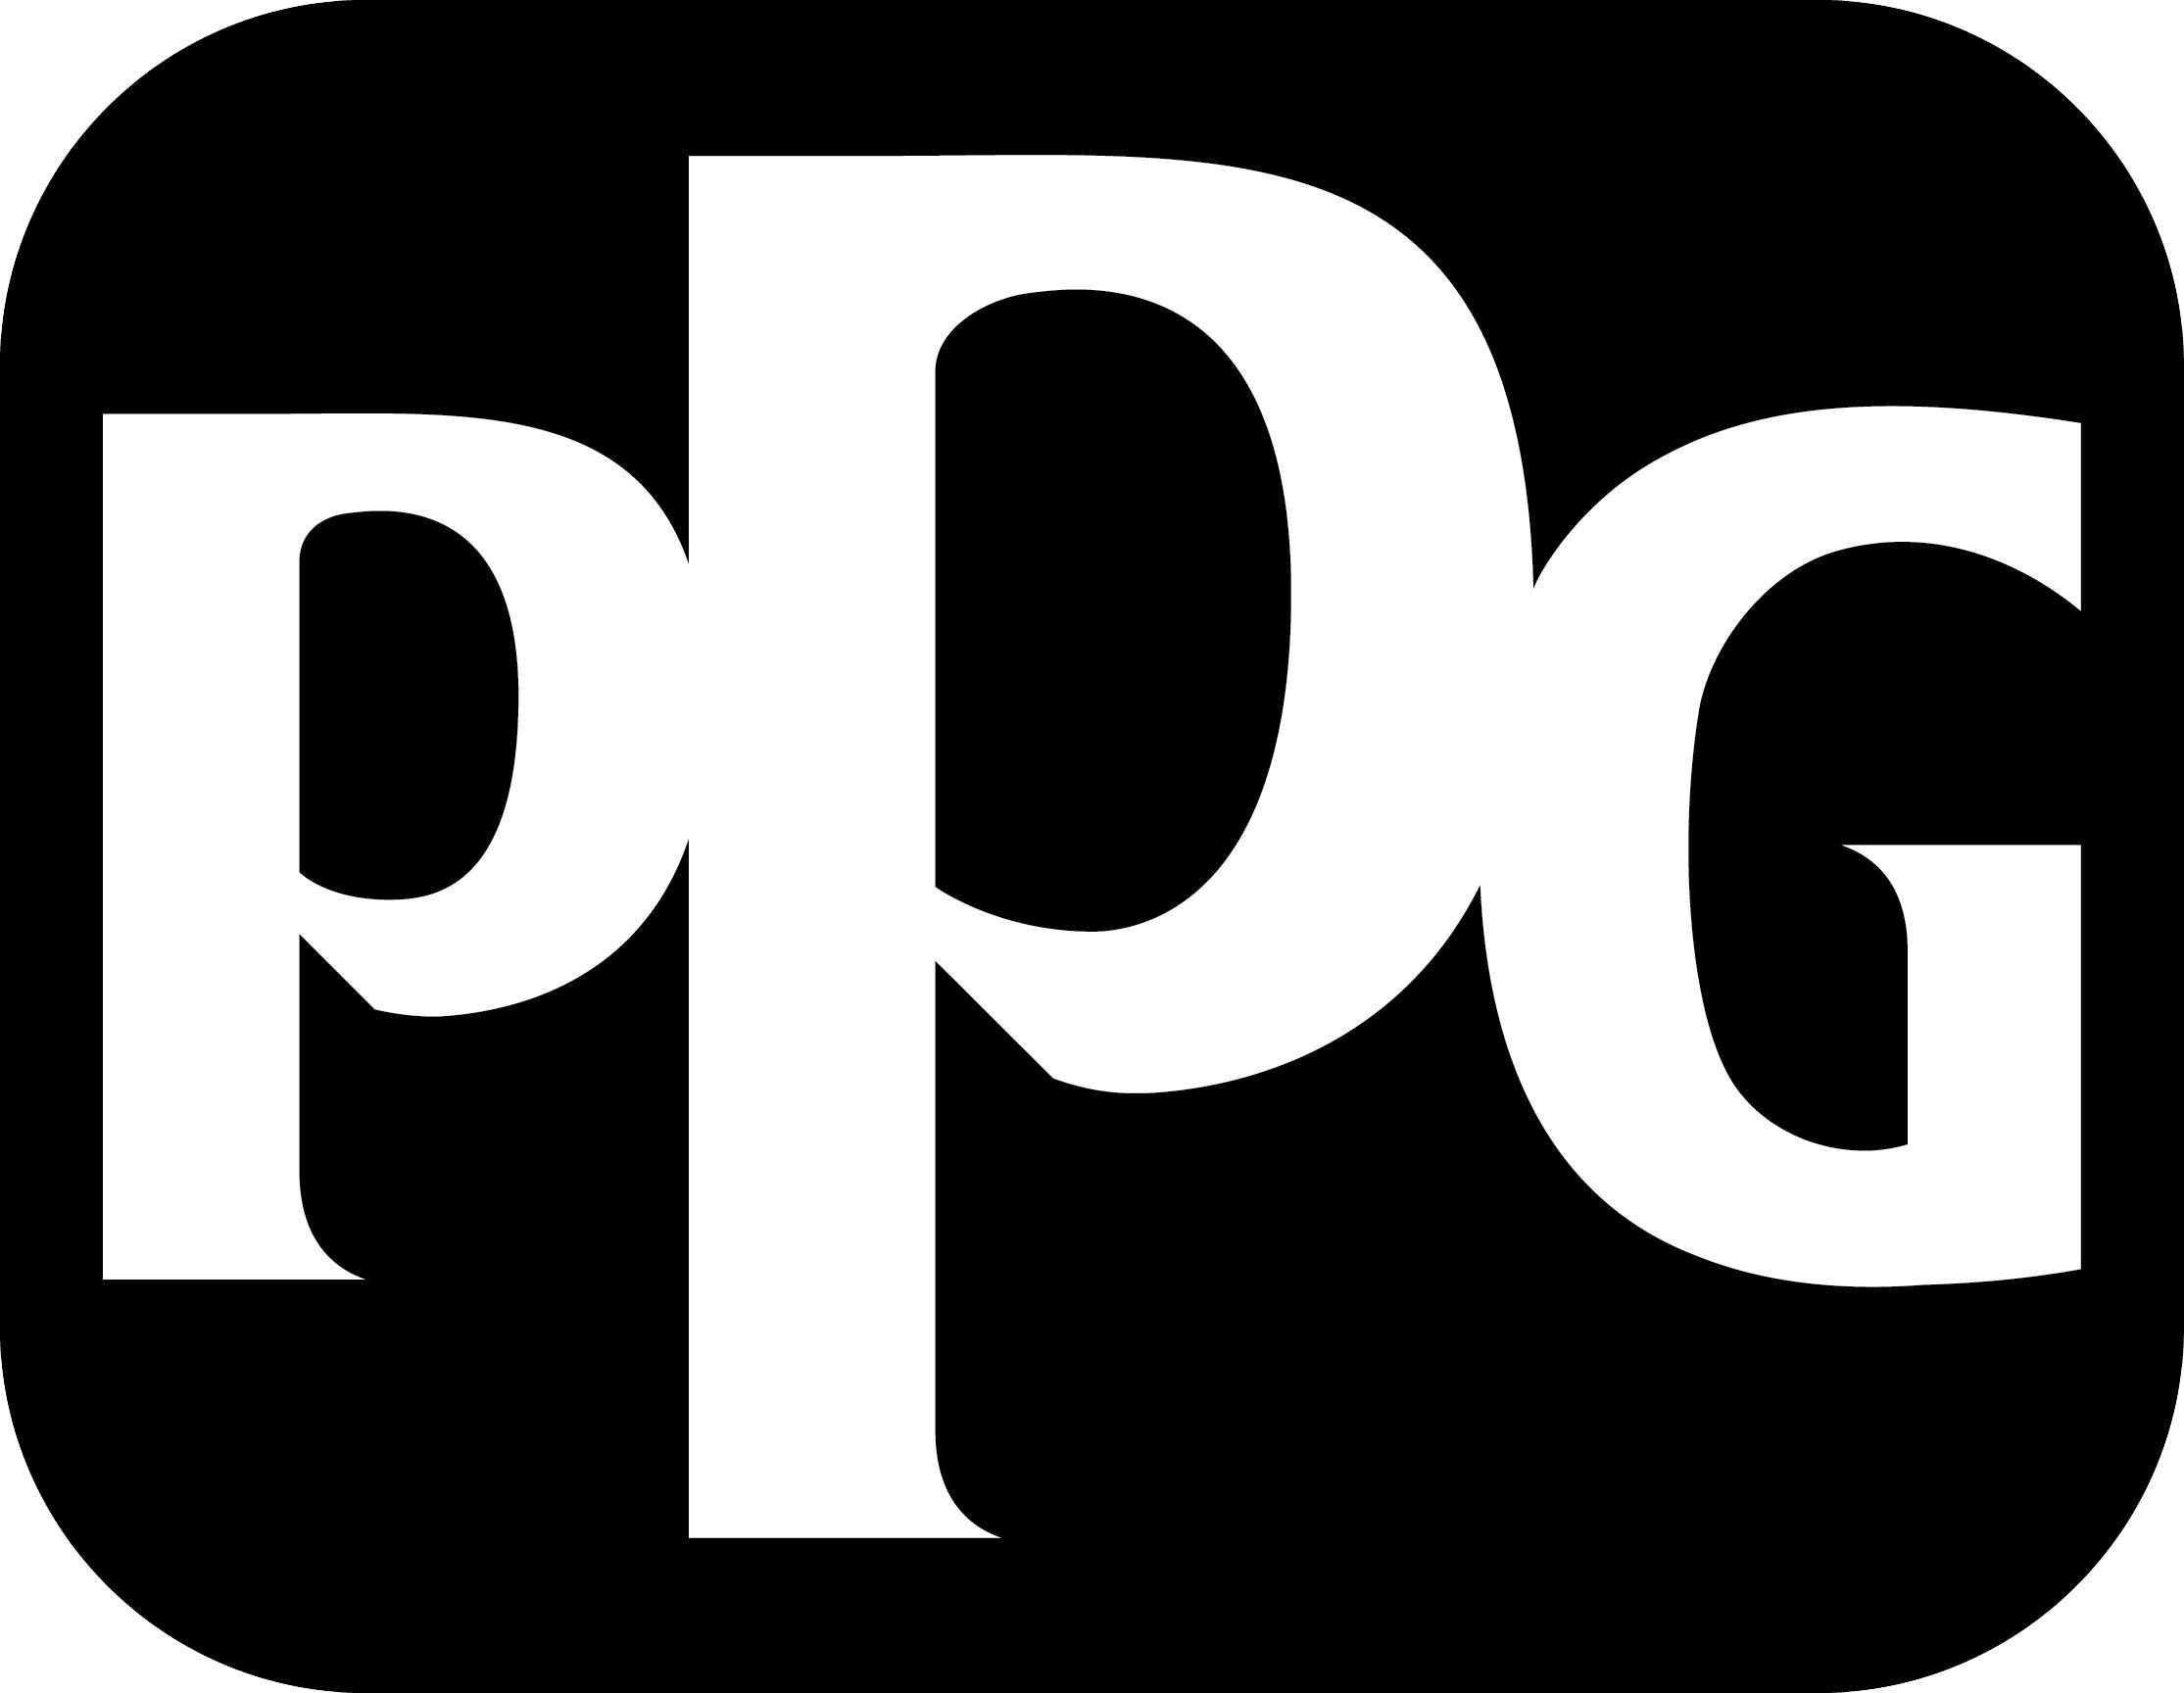 PPG-LG-1CP-BLK-POS